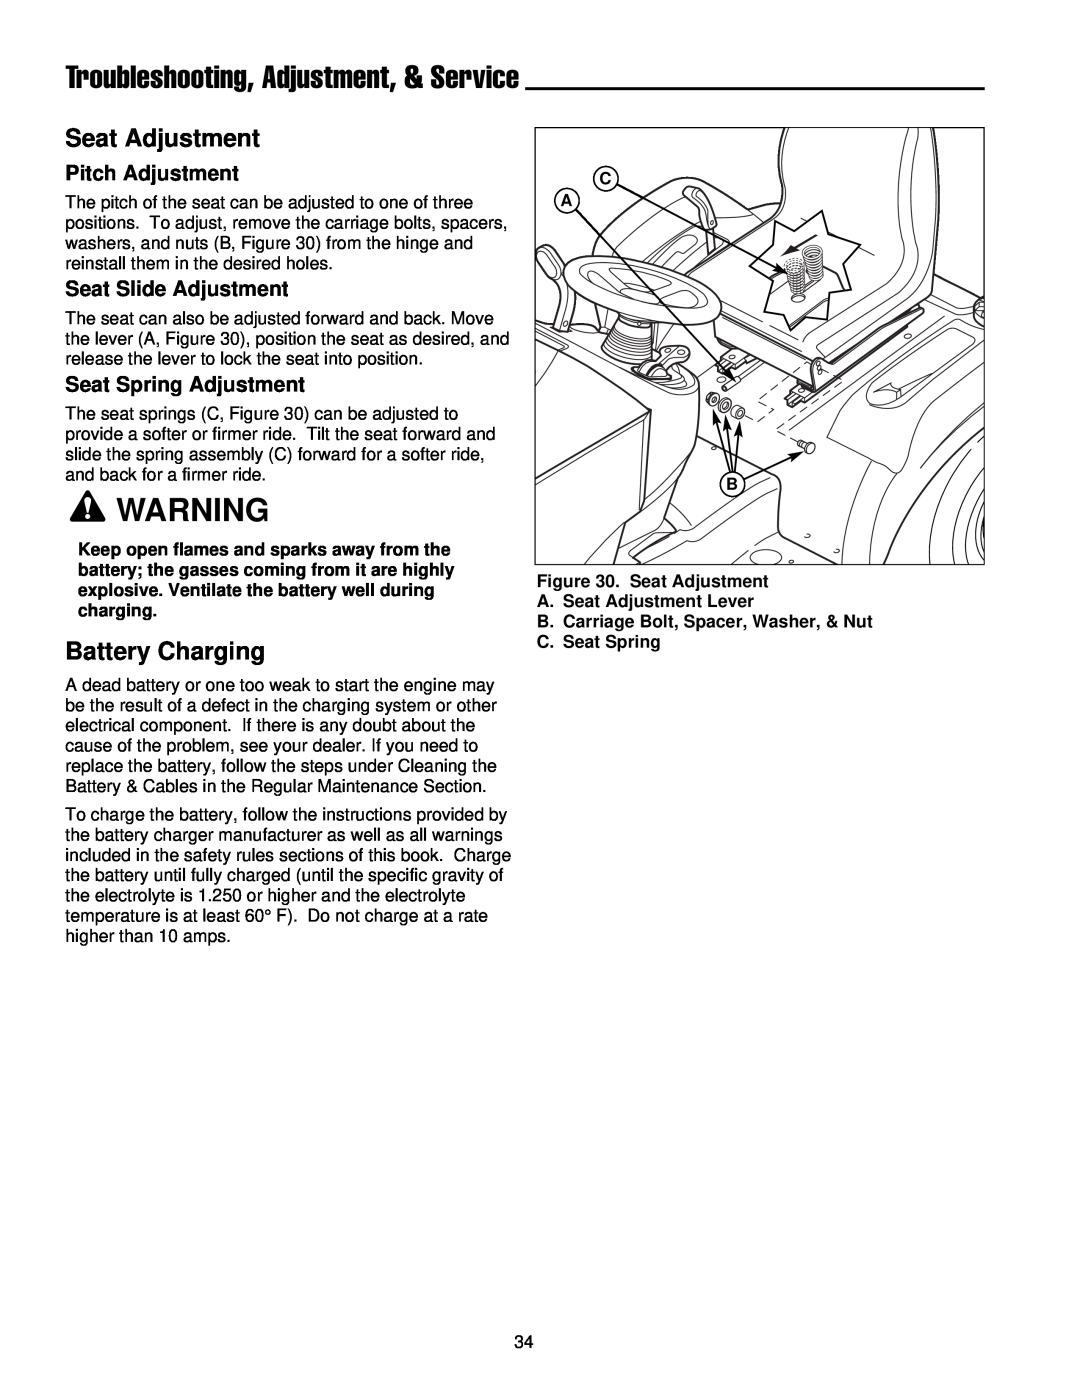 Simplicity 300 Series manual Seat Adjustment, Battery Charging, Troubleshooting, Adjustment, & Service, Pitch Adjustment 